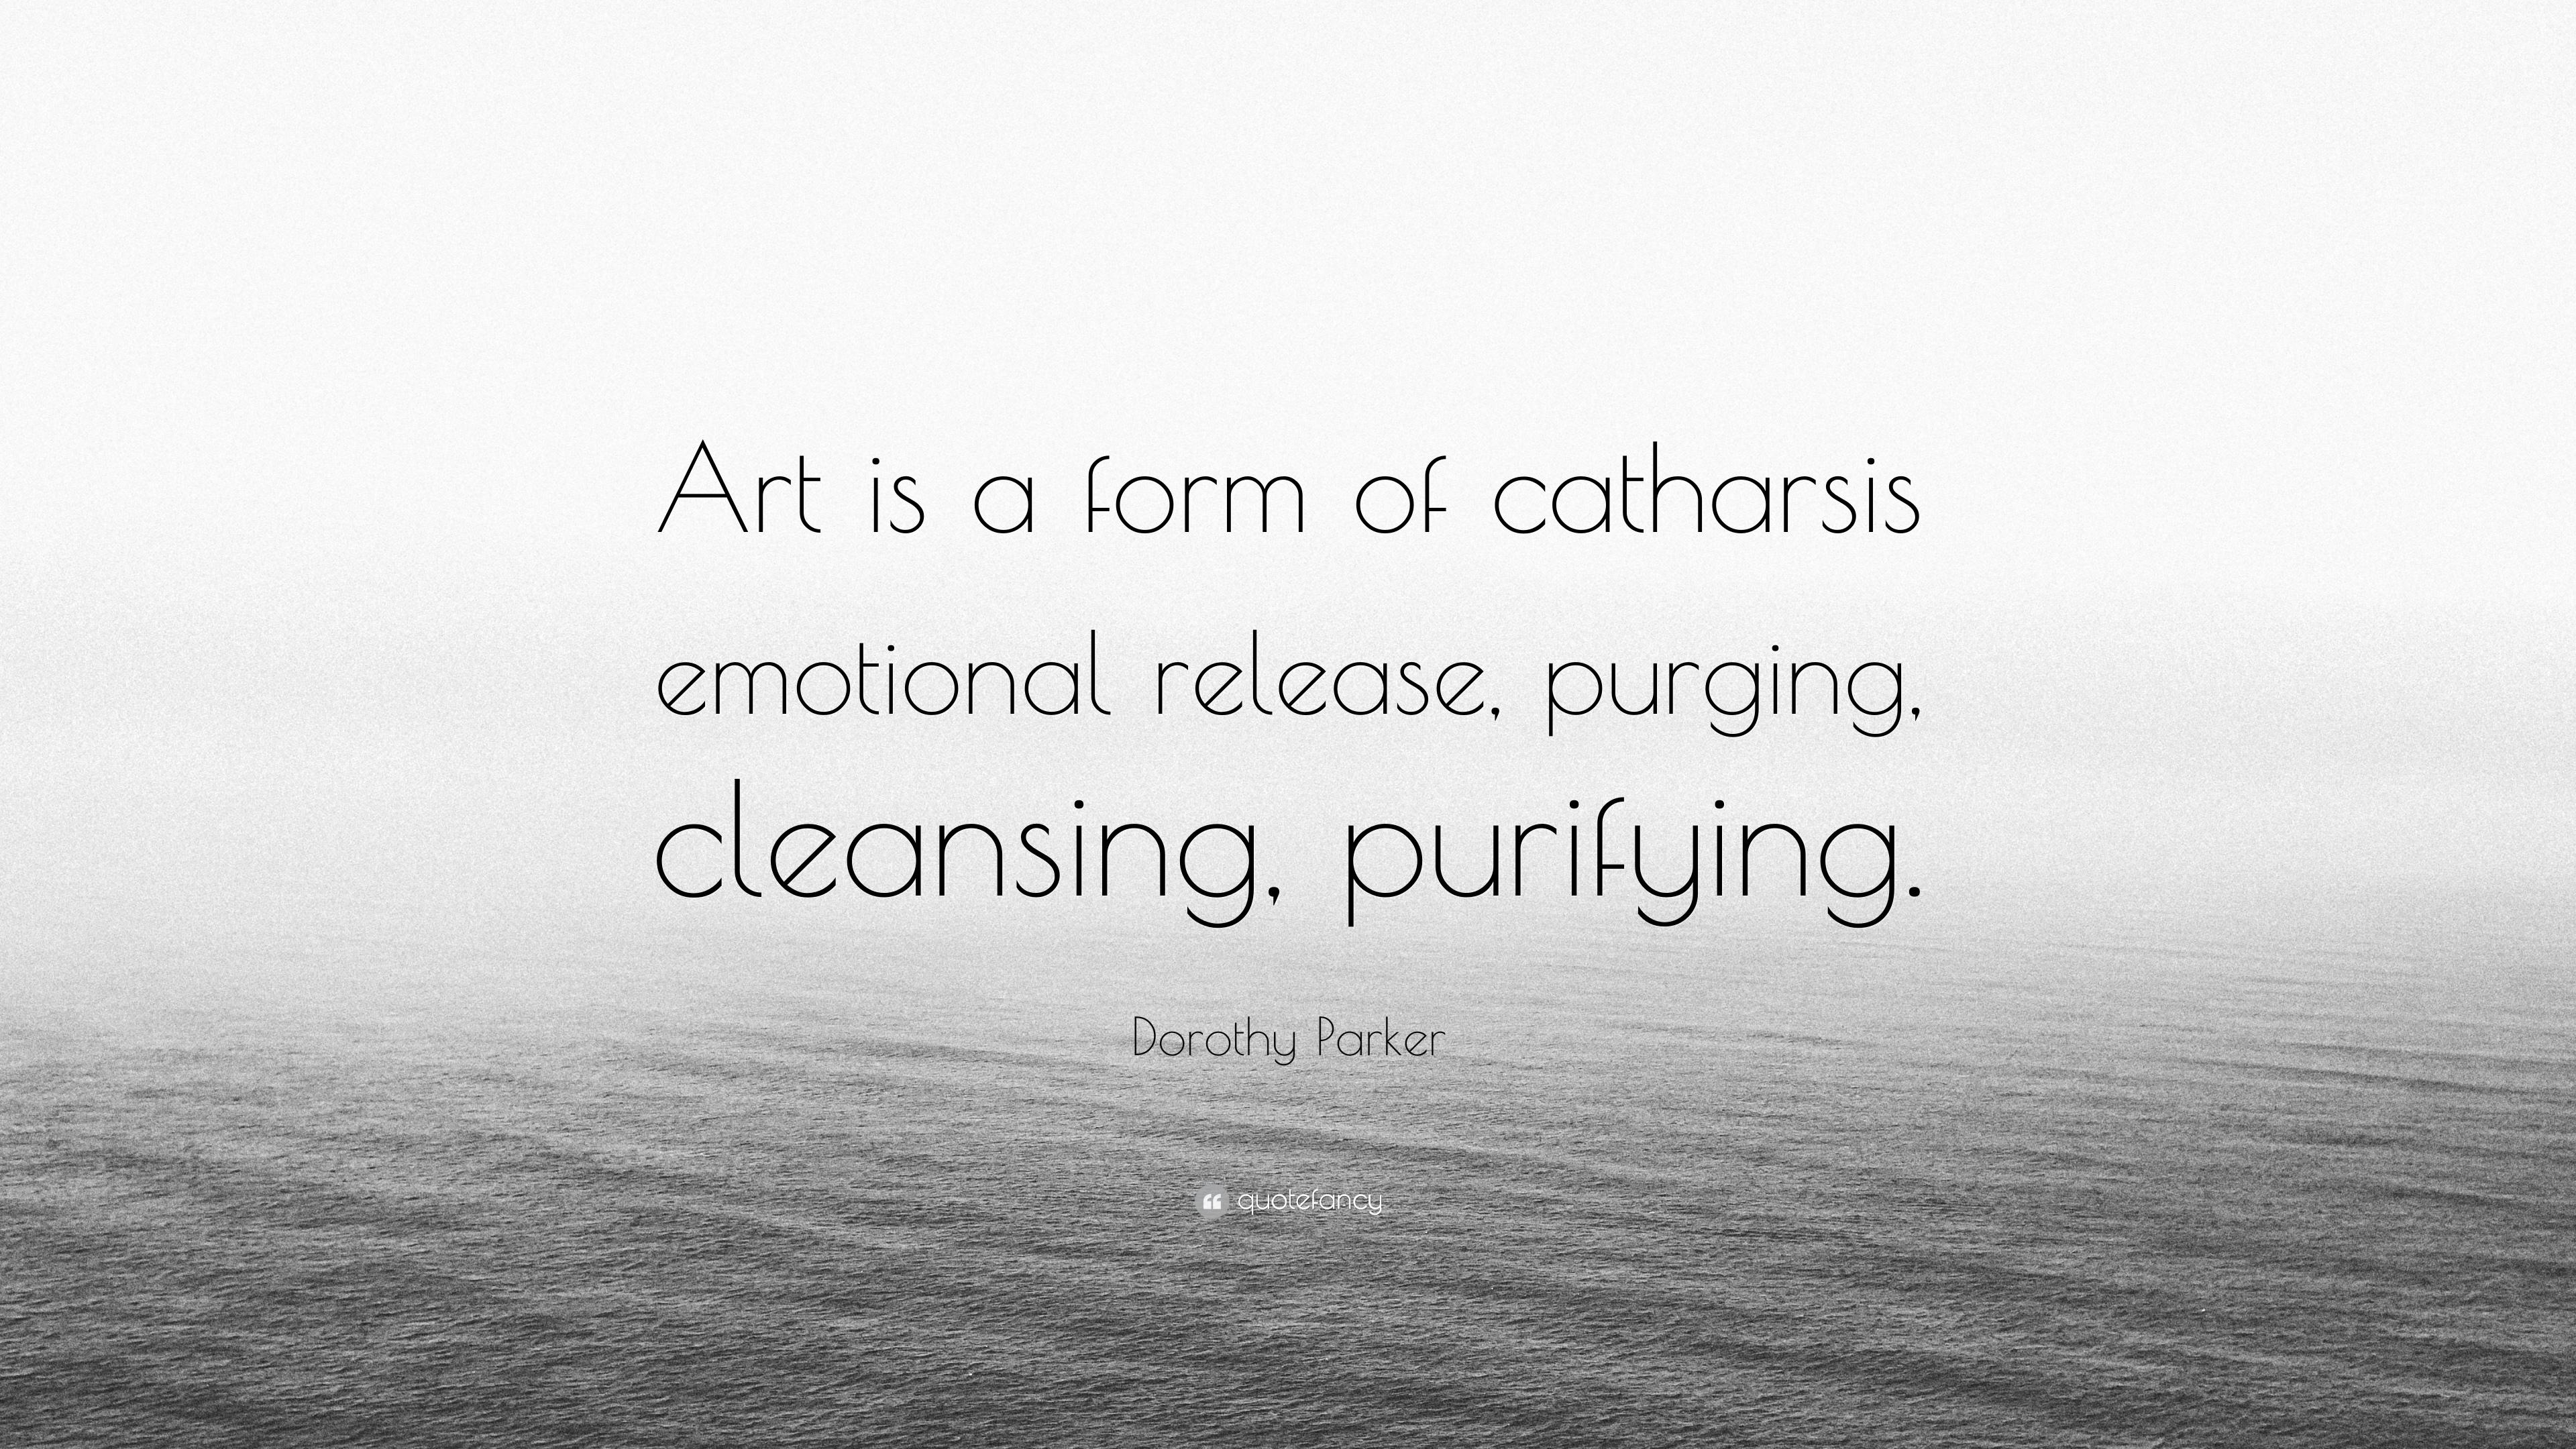 Dorothy Parker Quote: “Art is a form of catharsis emotional